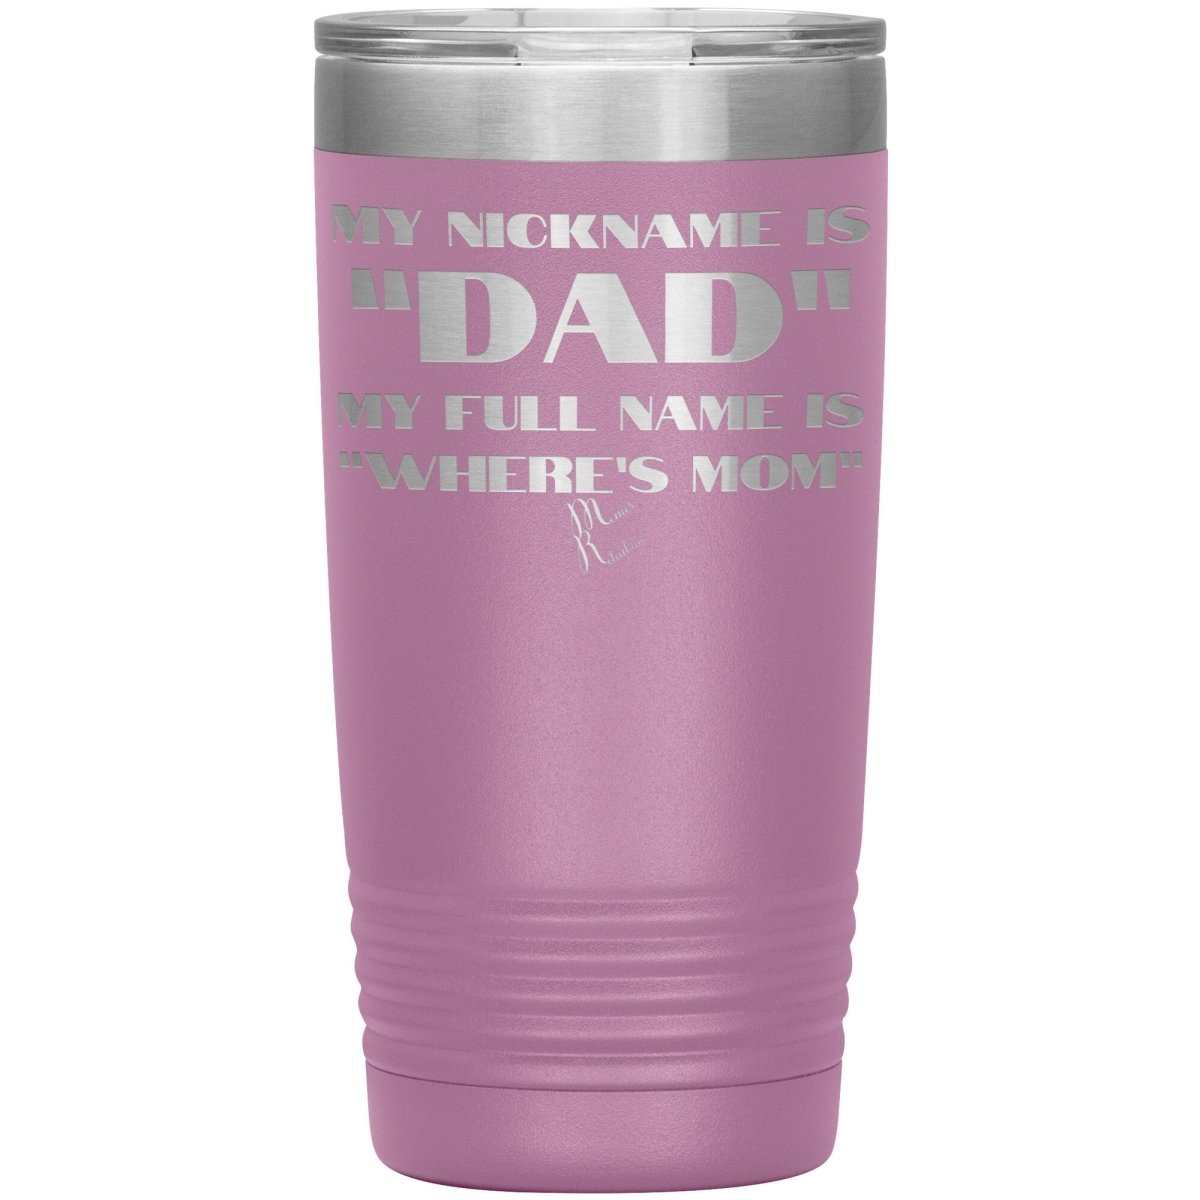 My Nickname is "Dad", My Full Name is "Where's Mom" Tumblers, 20oz Insulated Tumbler / Light Purple - MemesRetail.com